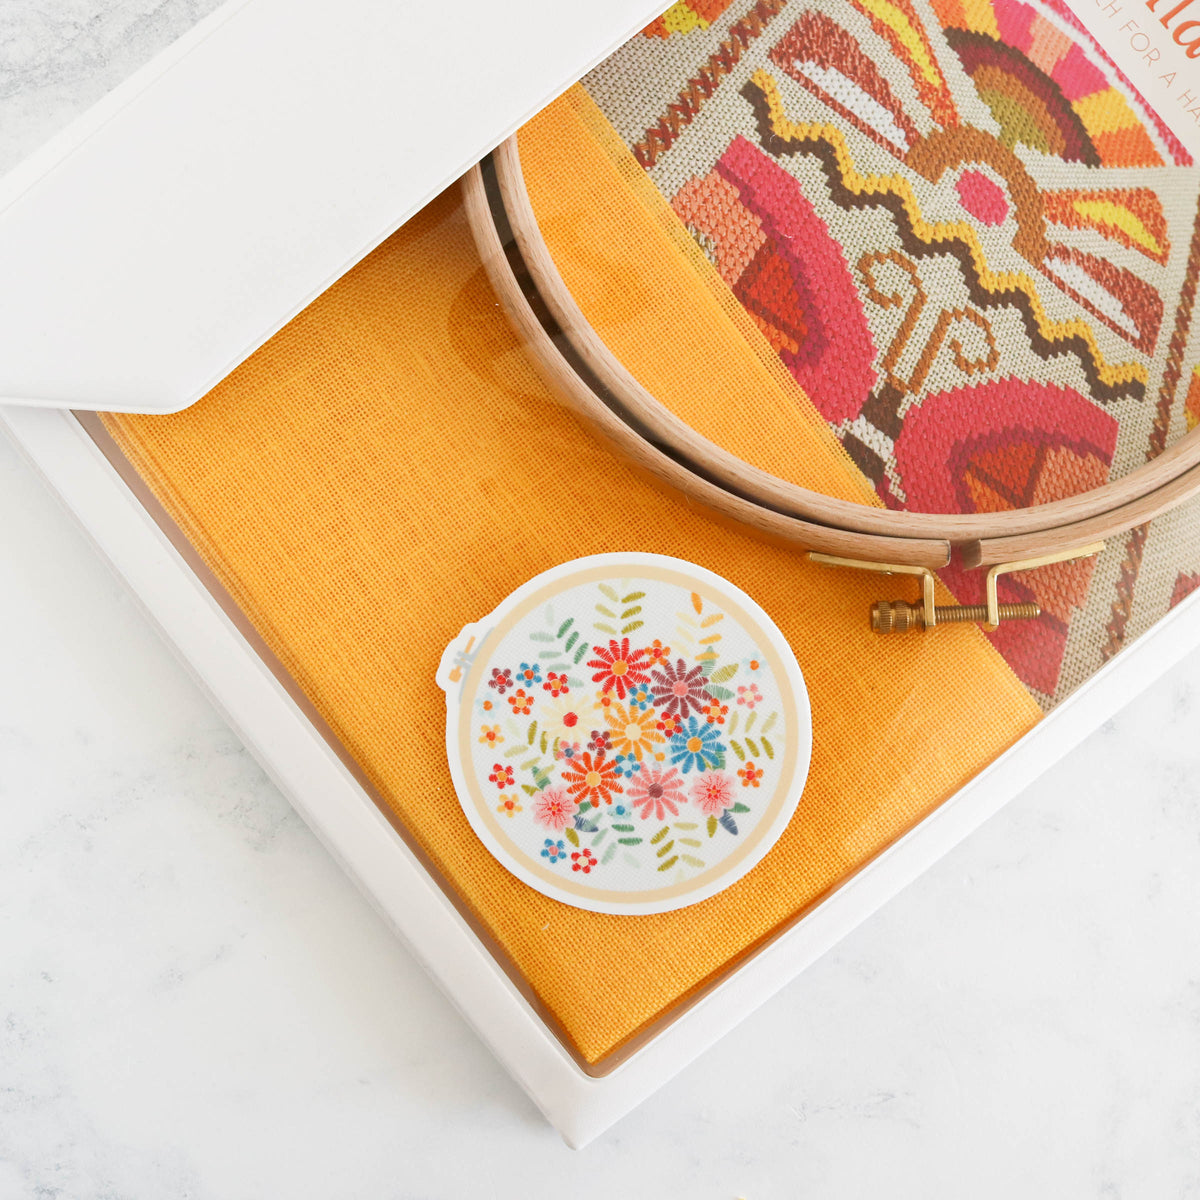 Stitchy Stickers - Floral Hoop